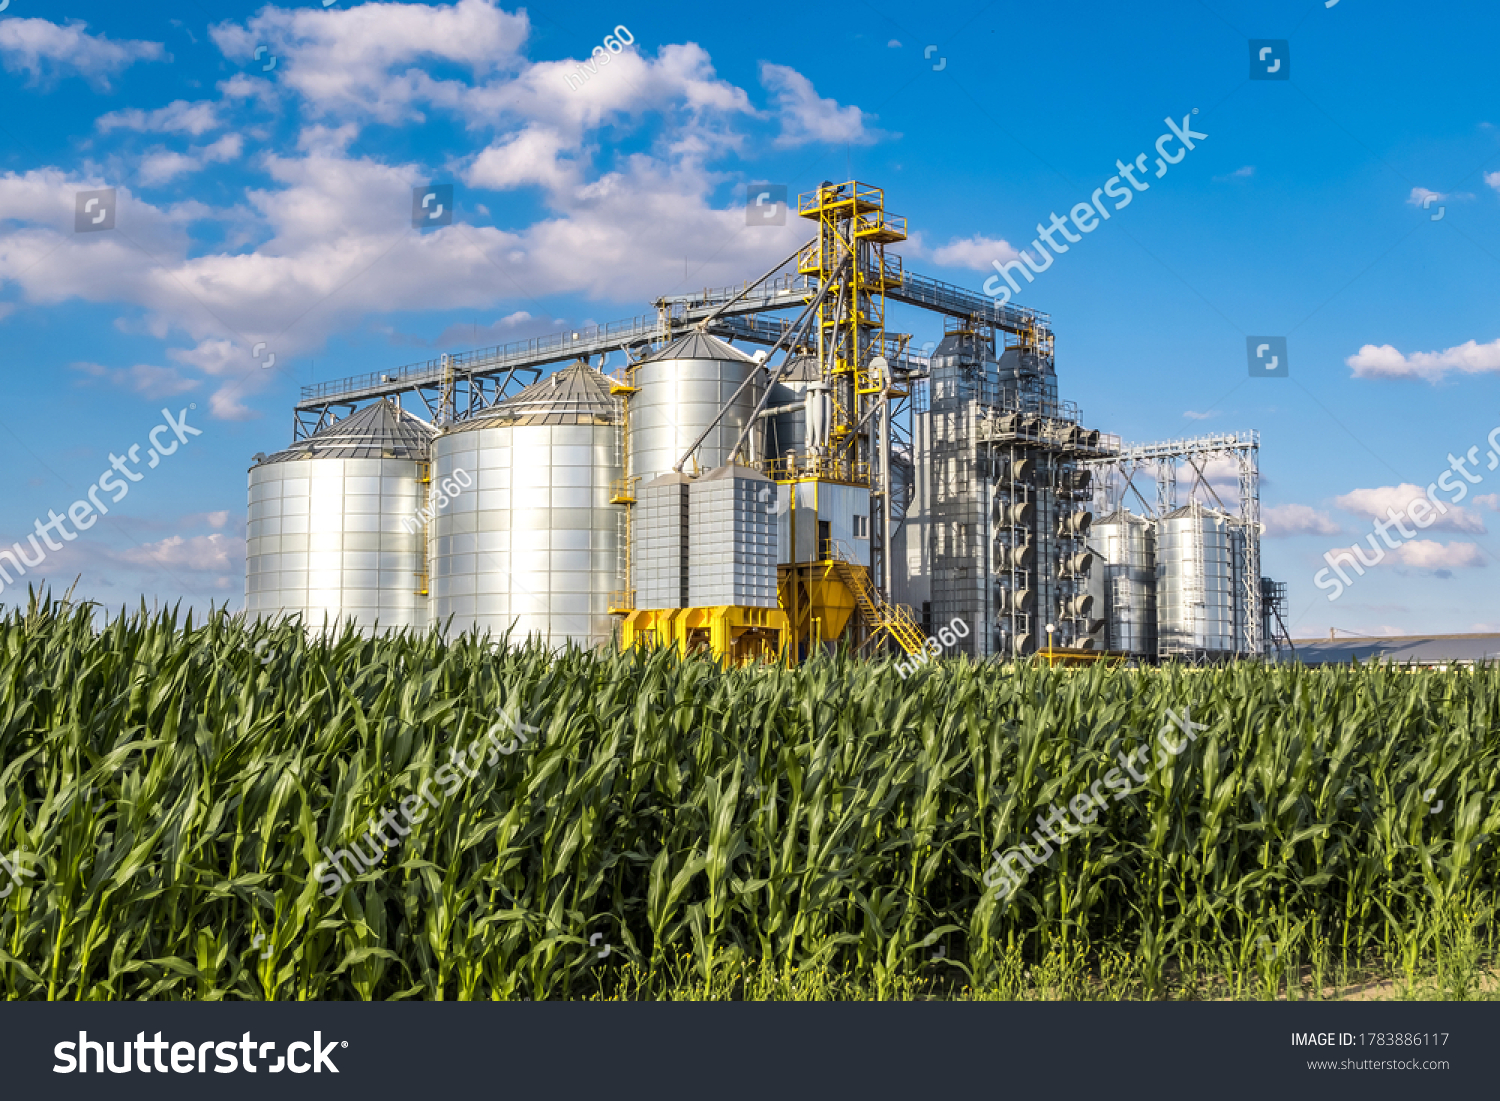 Modern Granary elevator. Silver silos on agro-processing and manufacturing plant for processing drying cleaning and storage of agricultural products, flour, cereals and grain.  #1783886117